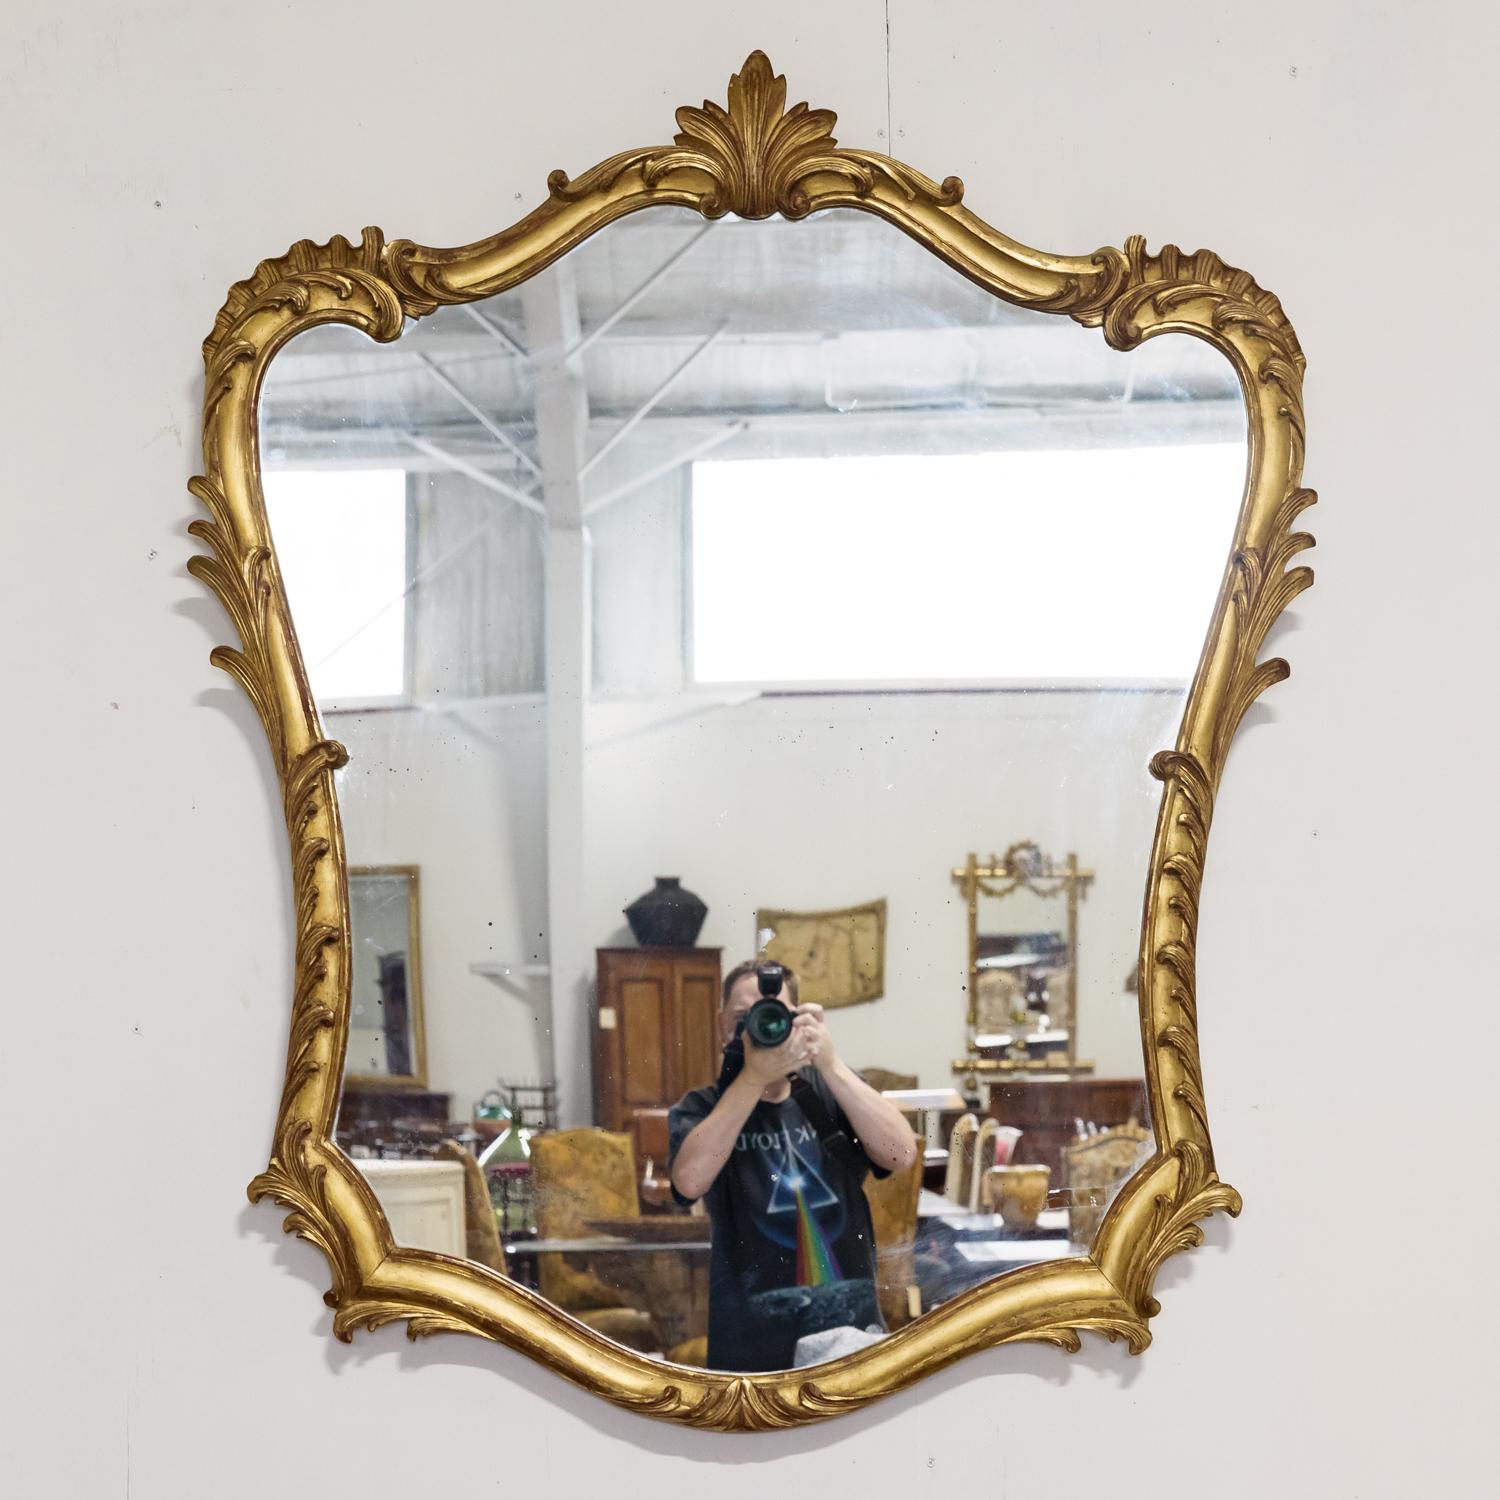 Impressive 19th century French Rococo Louis XV style hand carved giltwood mirror having its original glass, circa 1850s. The shapely frame features hand carved acanthus leaves and scroll motifs with red oxidation showing through the beautiful water